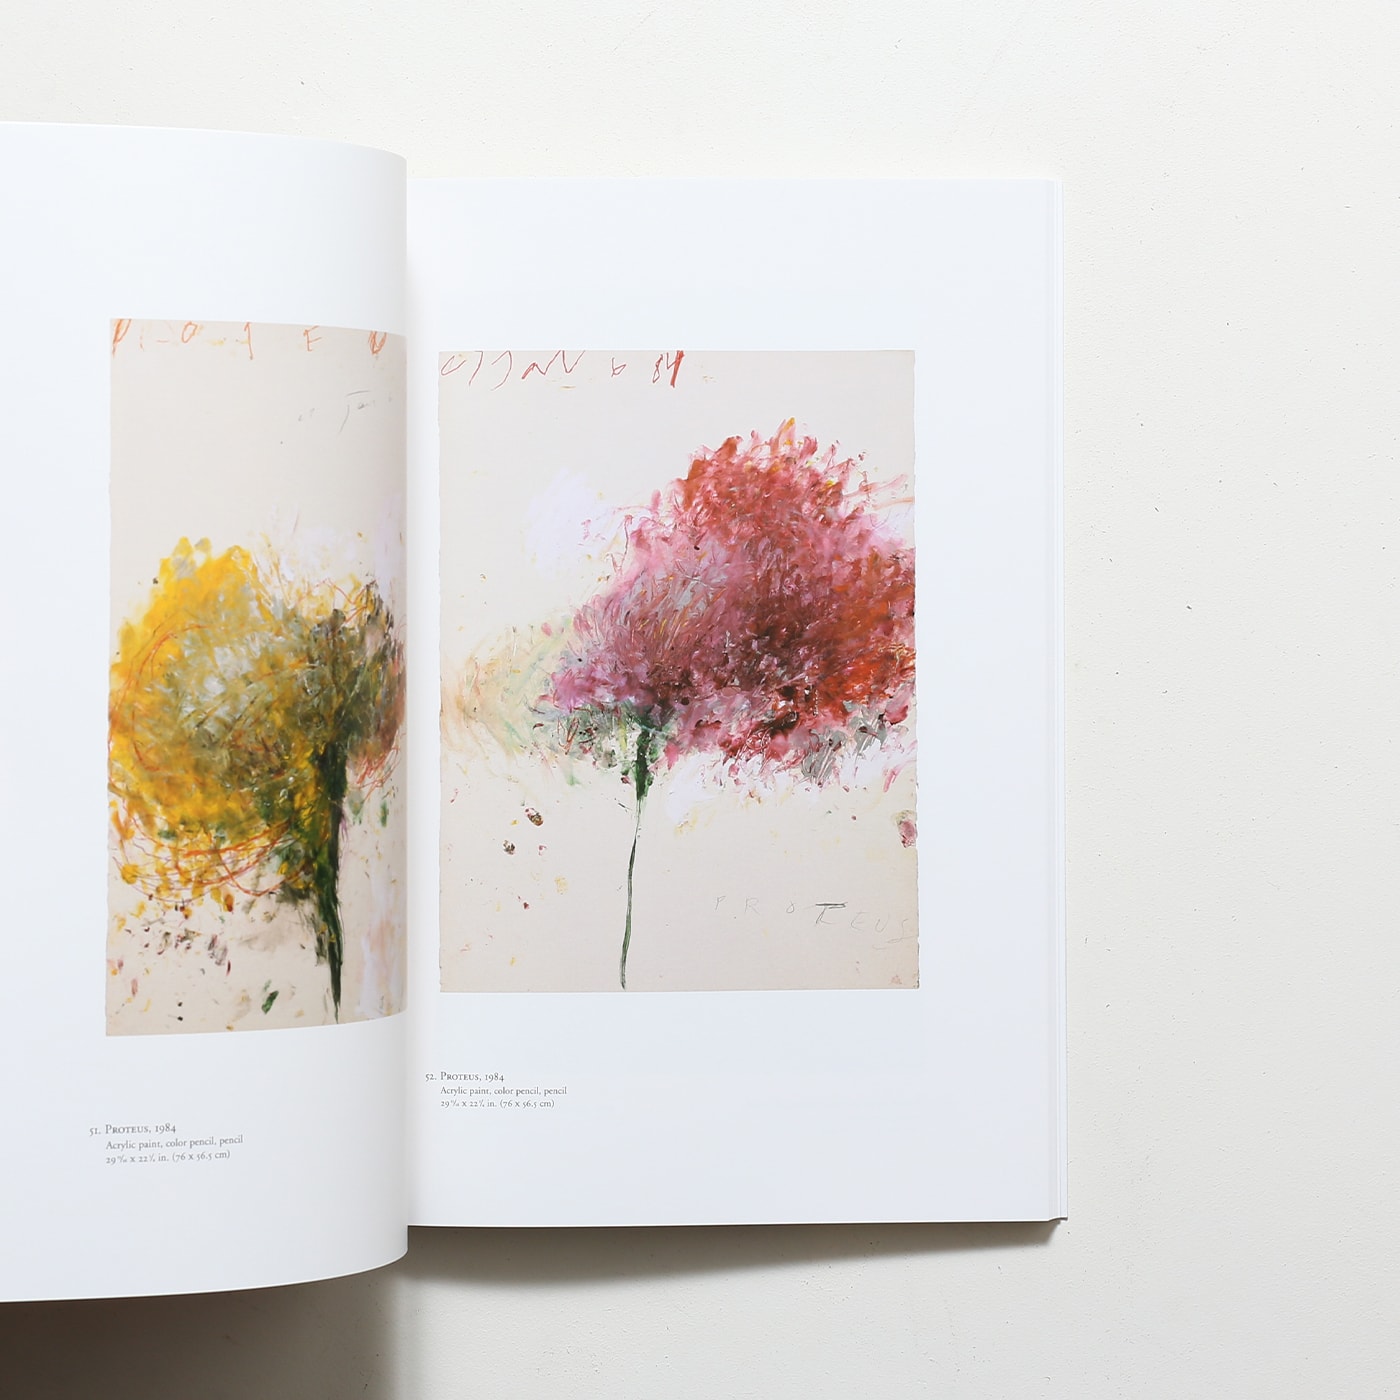 Cy Twombly: Fifty Years of Works on Paper